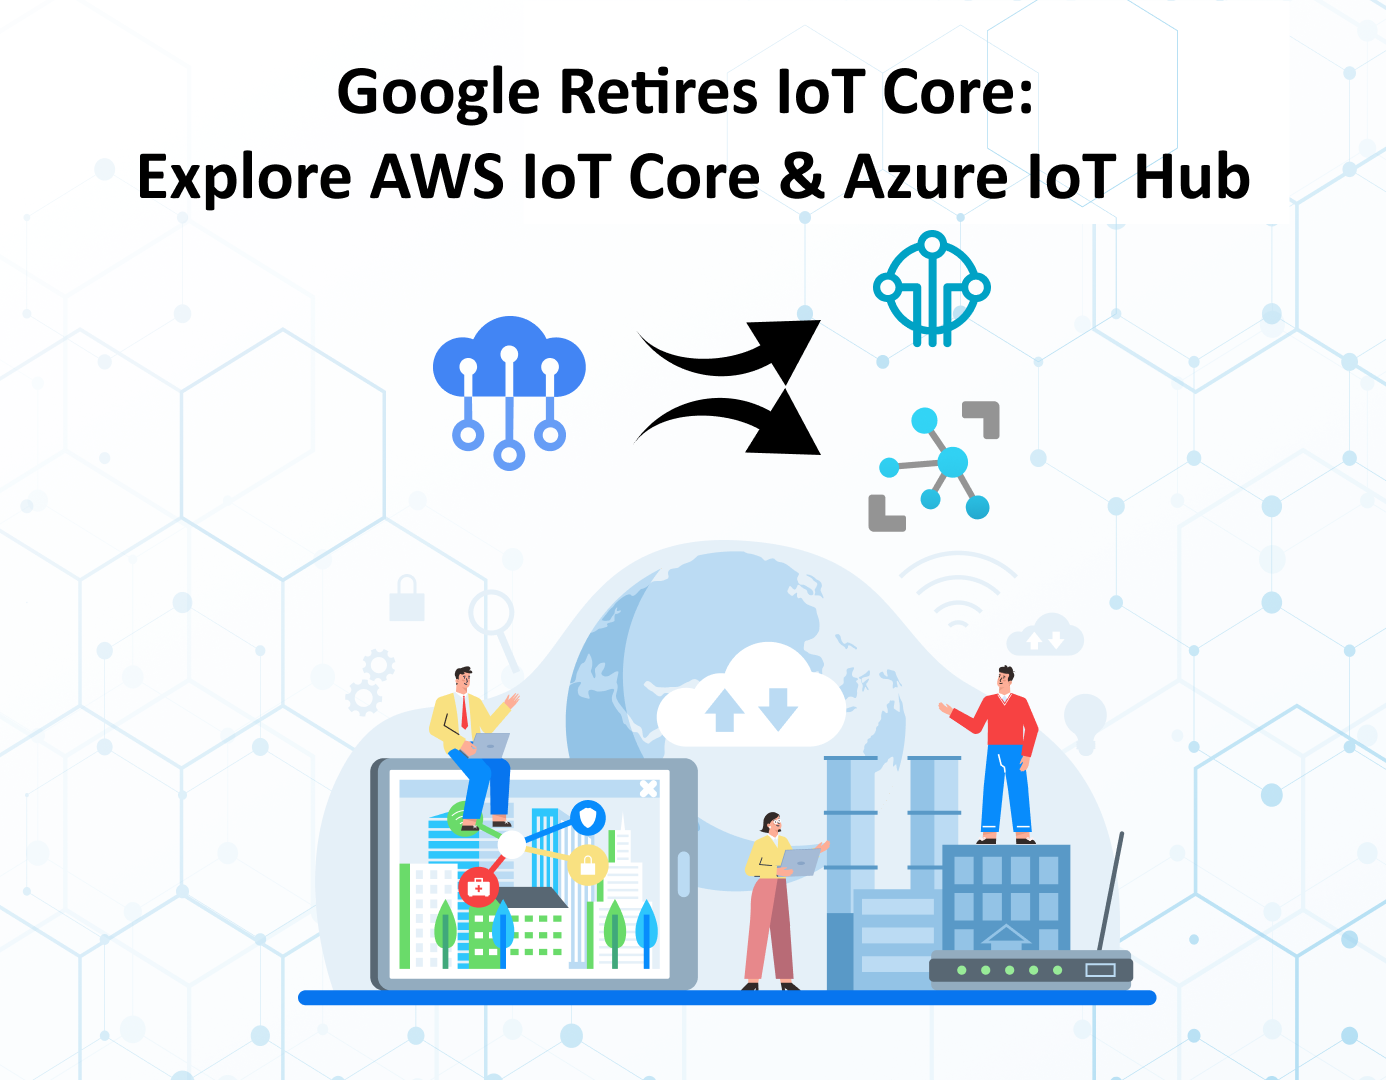 Image representing the topic of Google IoT Core retirement and alternative solutions discussed in the blog post.